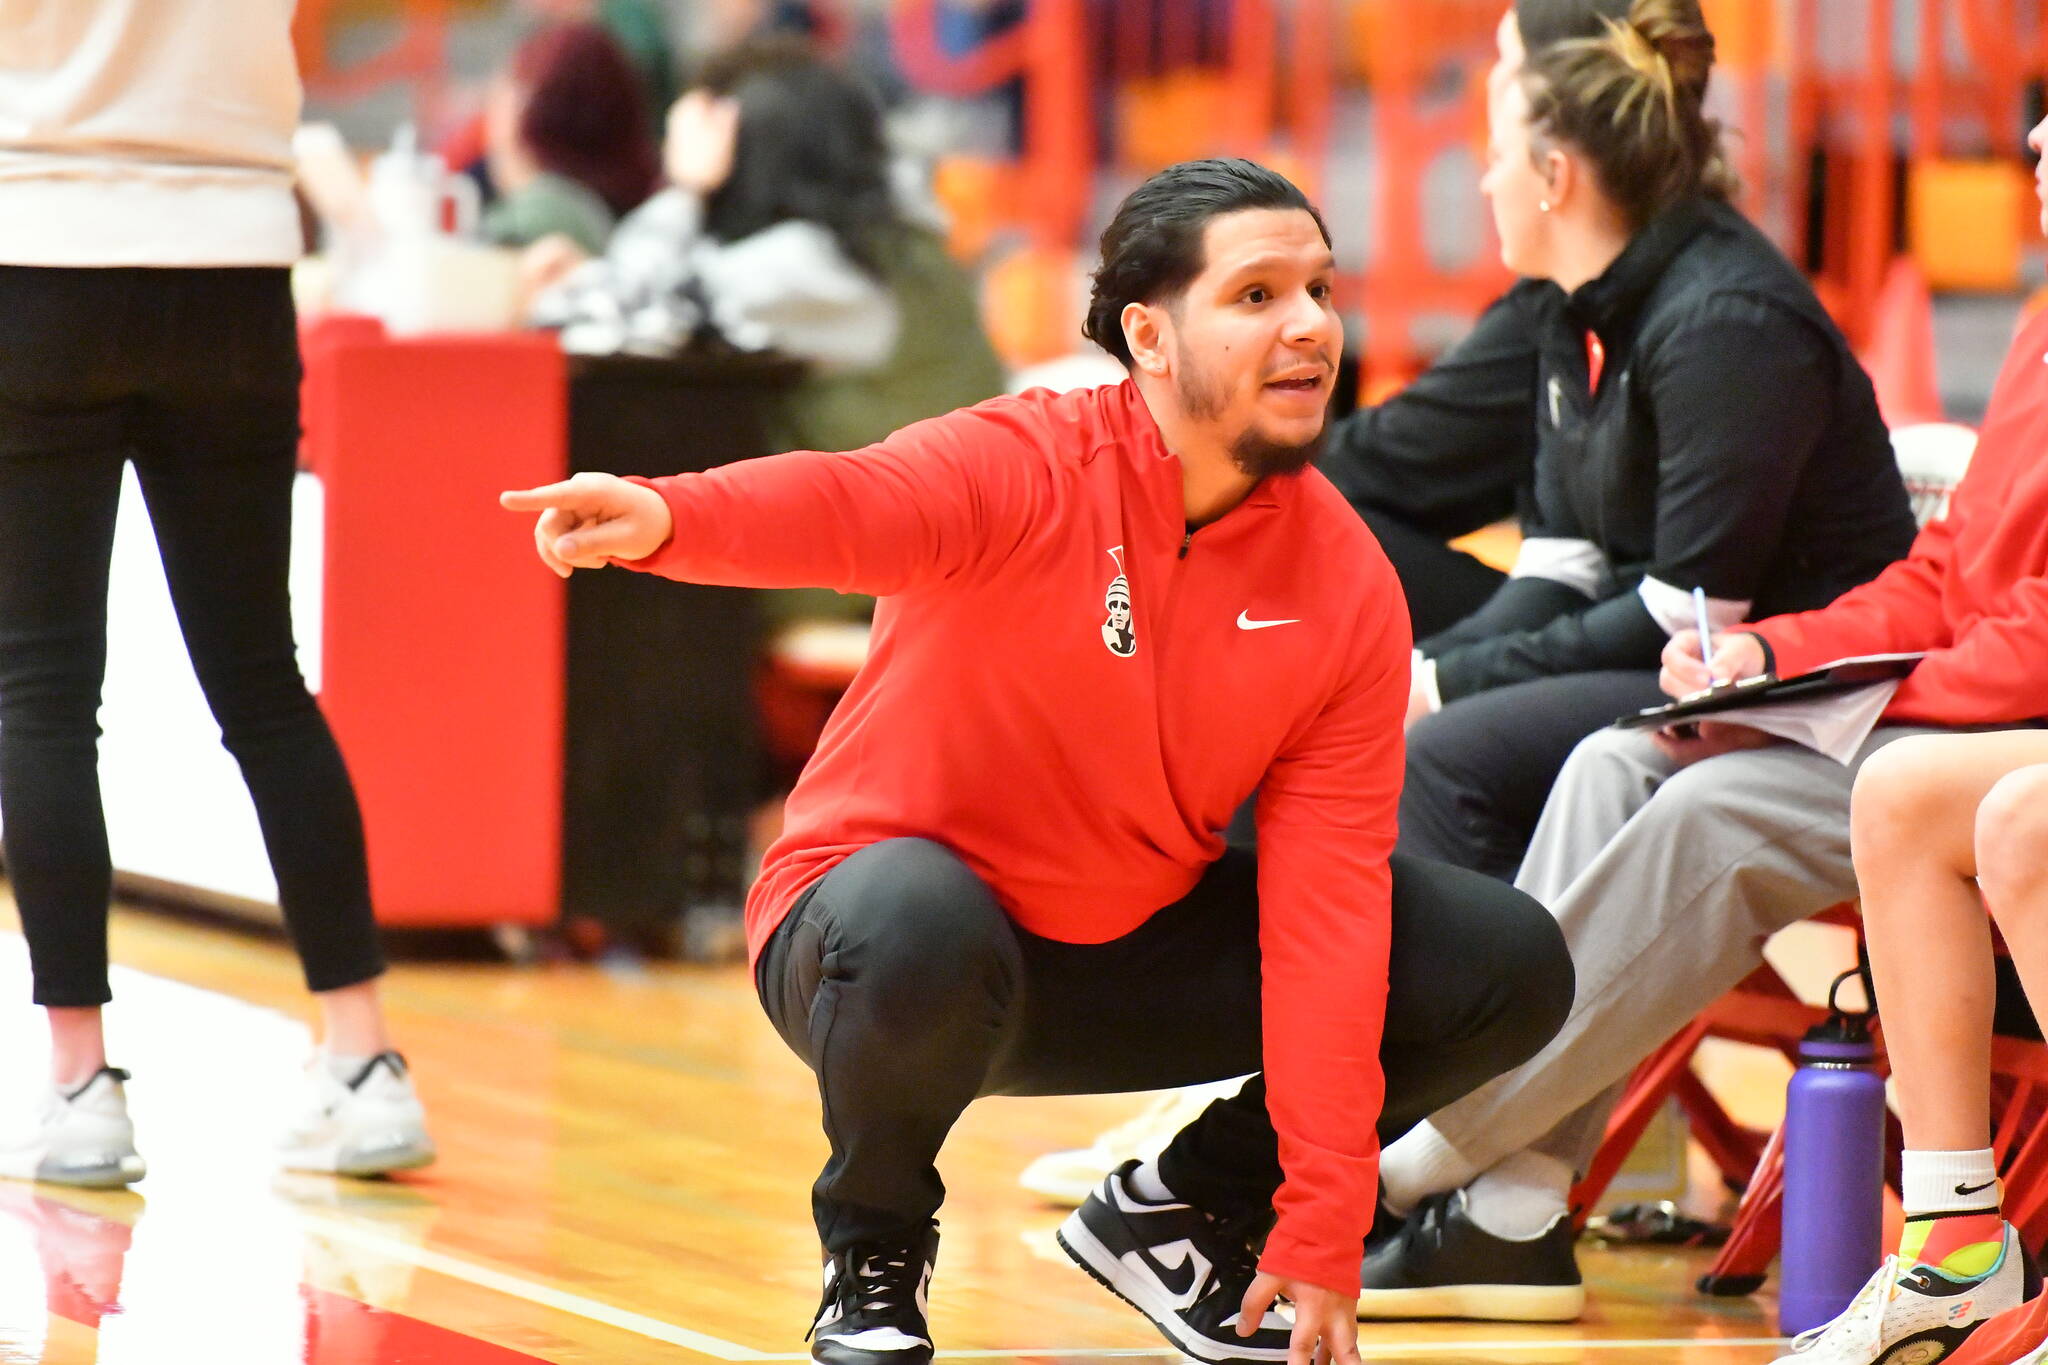 Jay Franco hired as new EvCC women’s basketball coach | HeraldNet.com